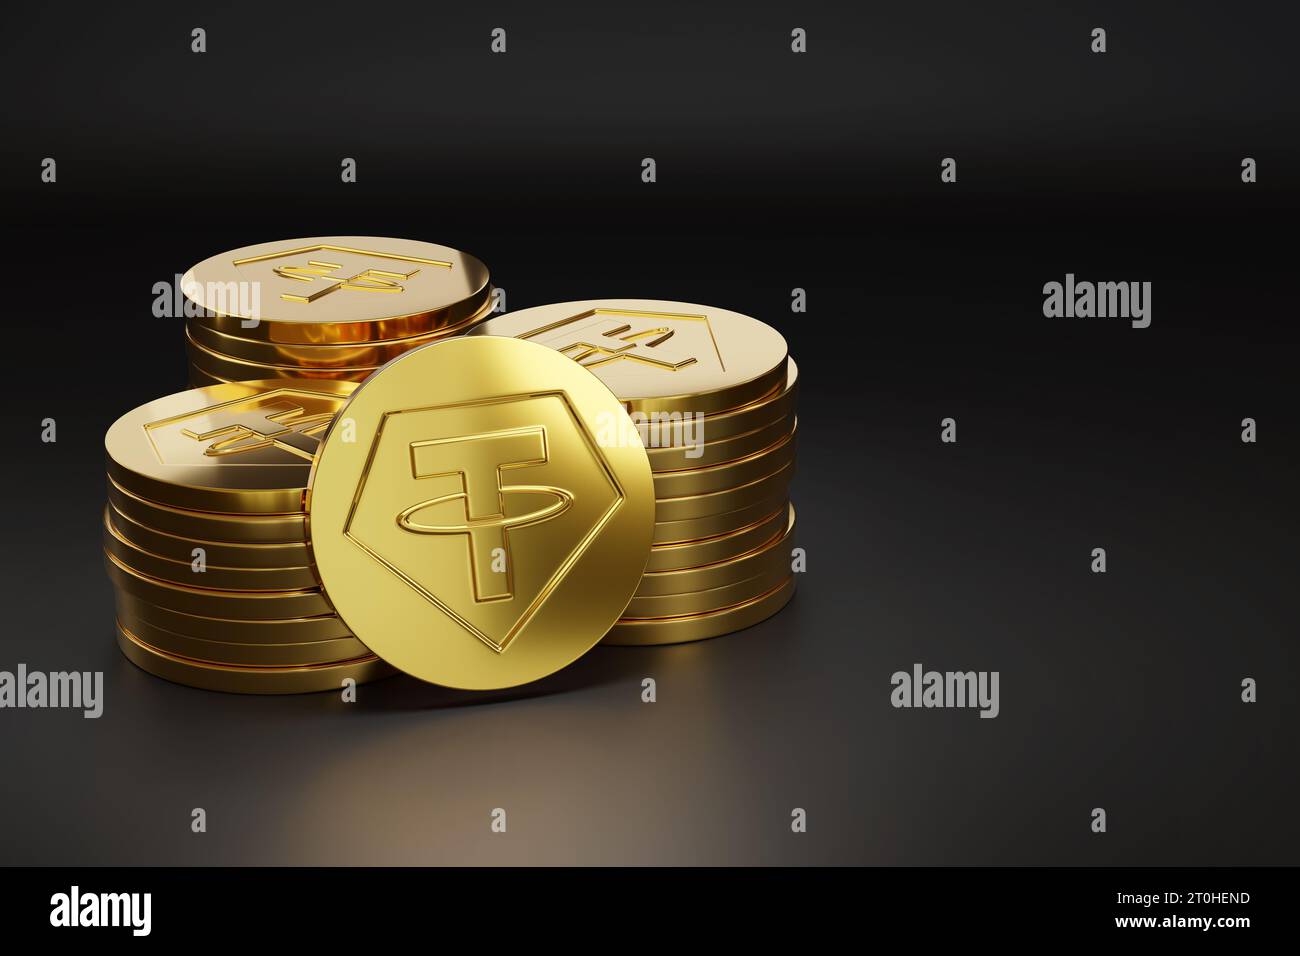 Stack of golden Tether USDT coins. 3d iluustration. Stock Photo